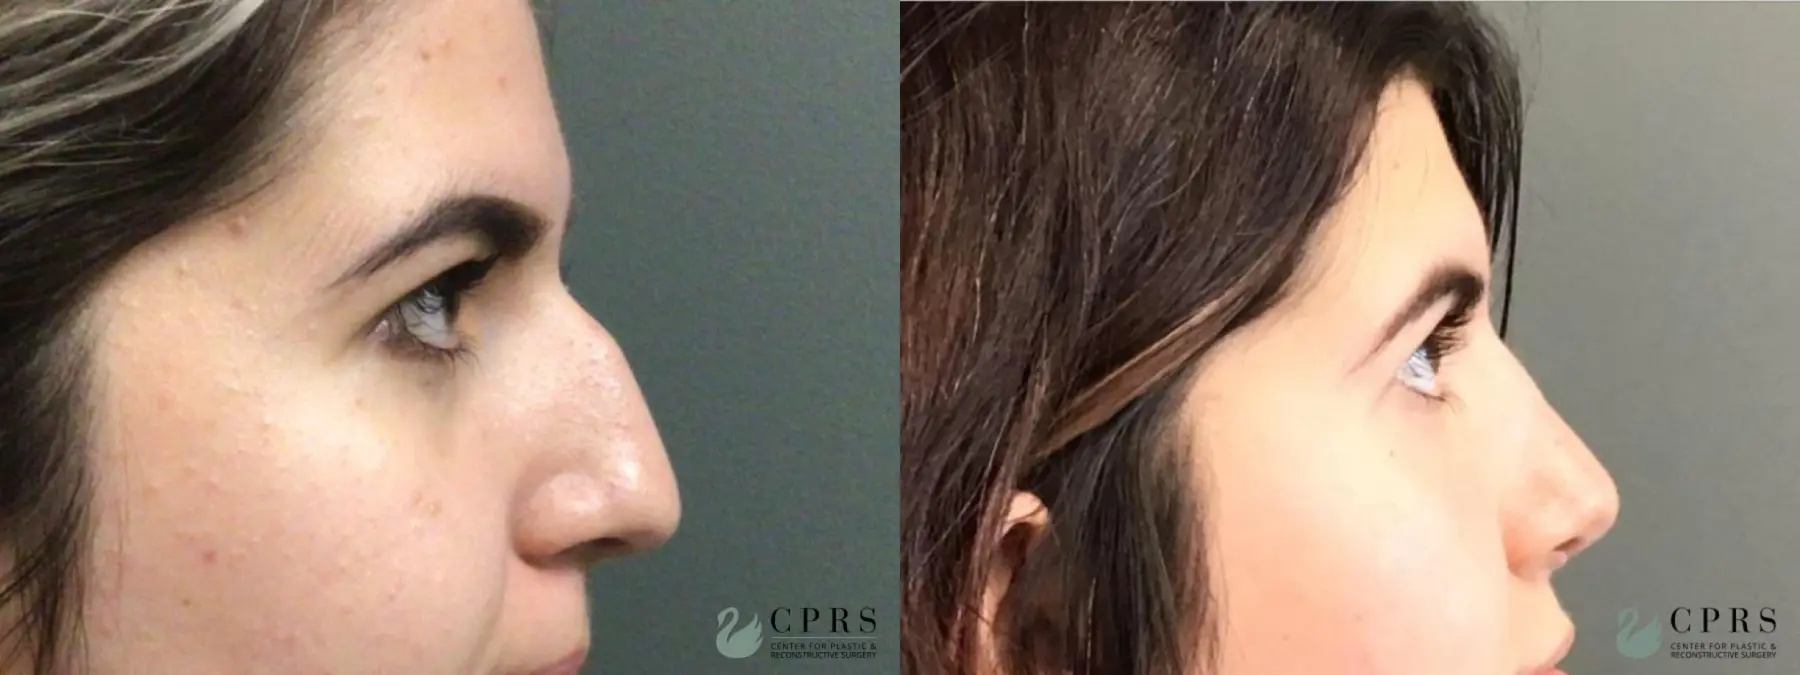 Rhinoplasty: Patient 14 - Before and After 3